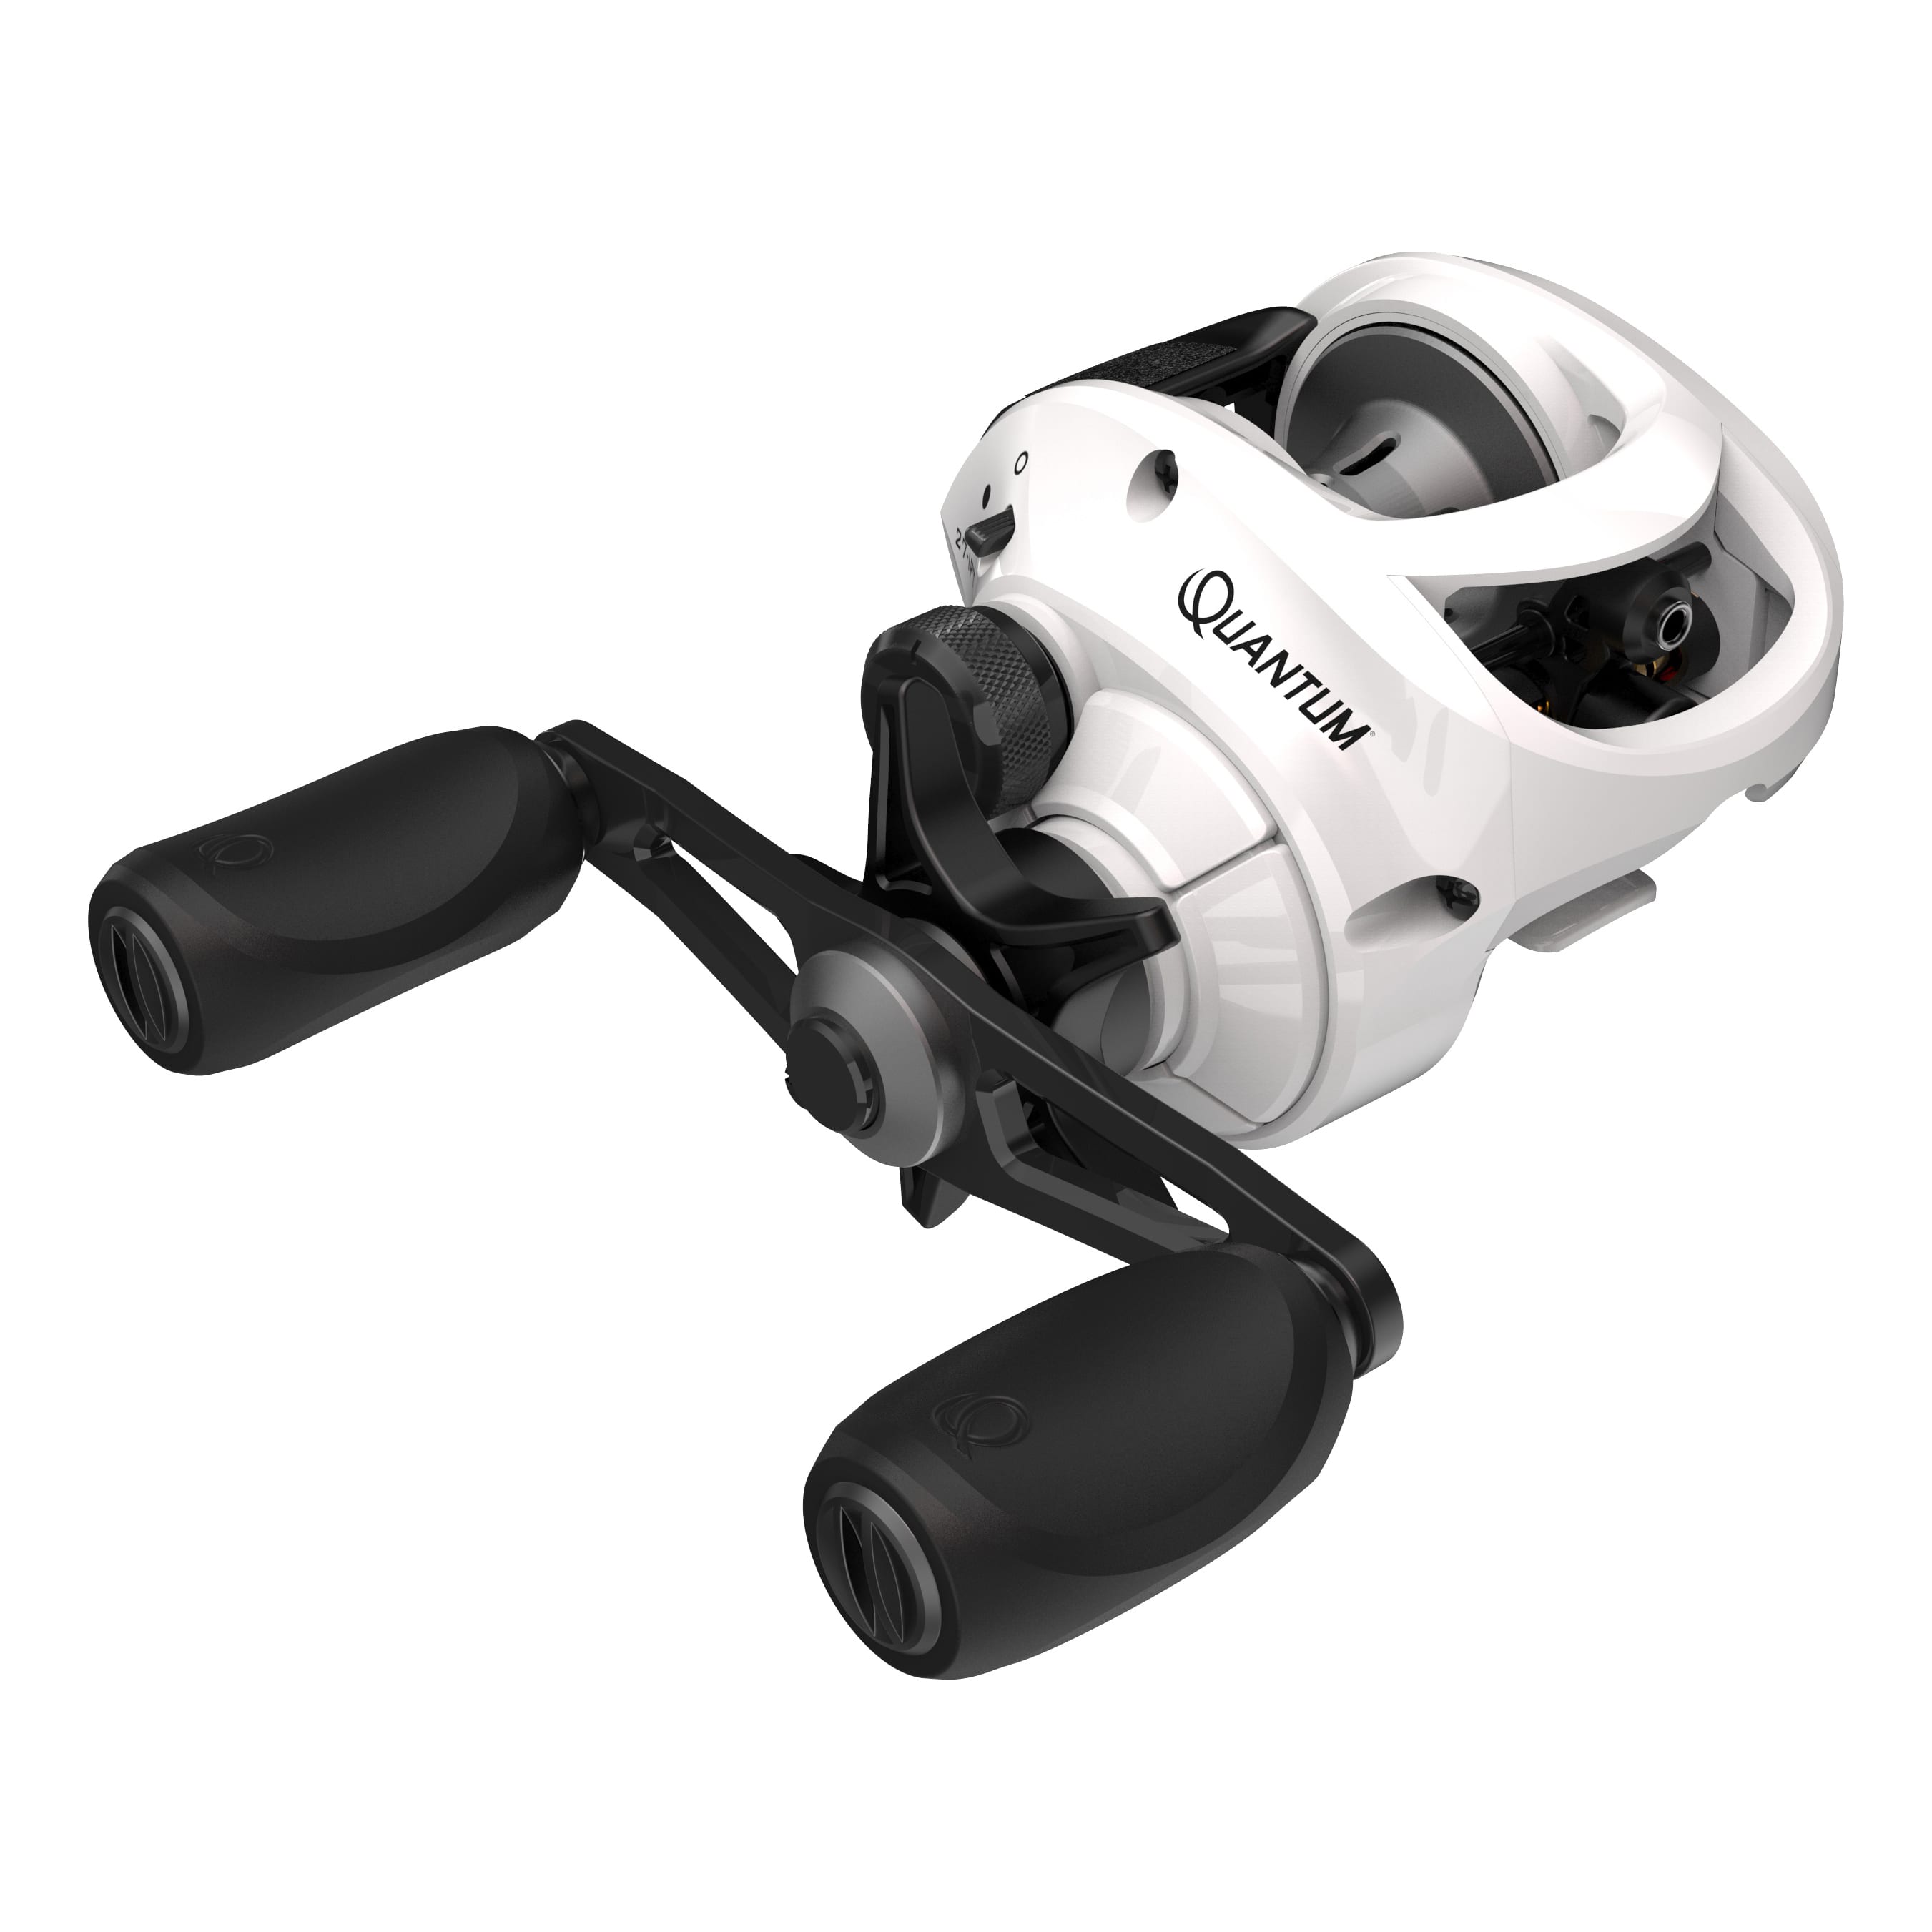 Fishing reel of the day Quantum Accurist PT 